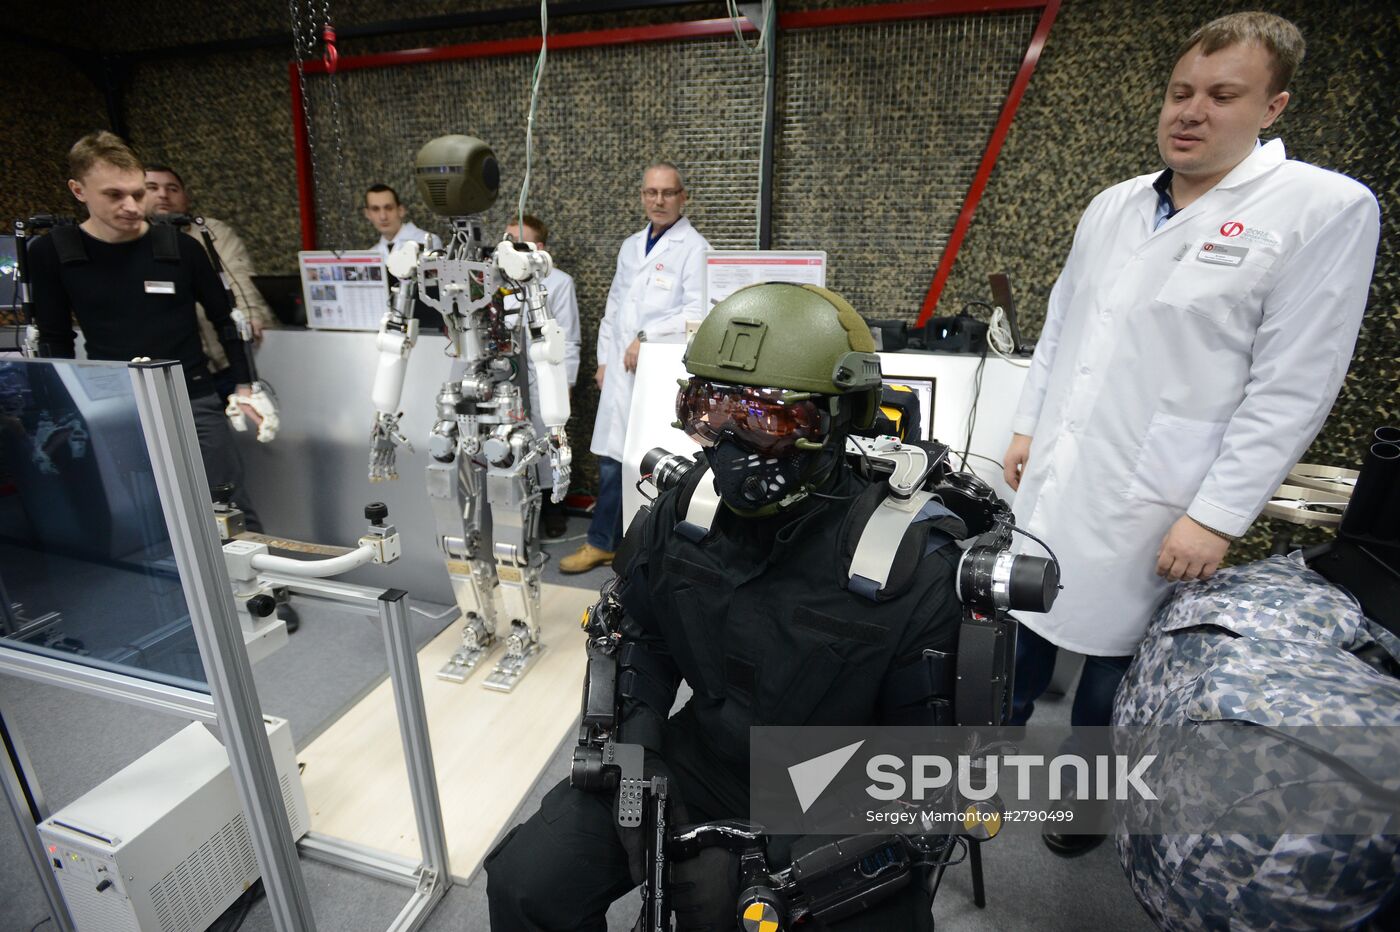 Display of state-of-the-art military technologies used in public healthcare